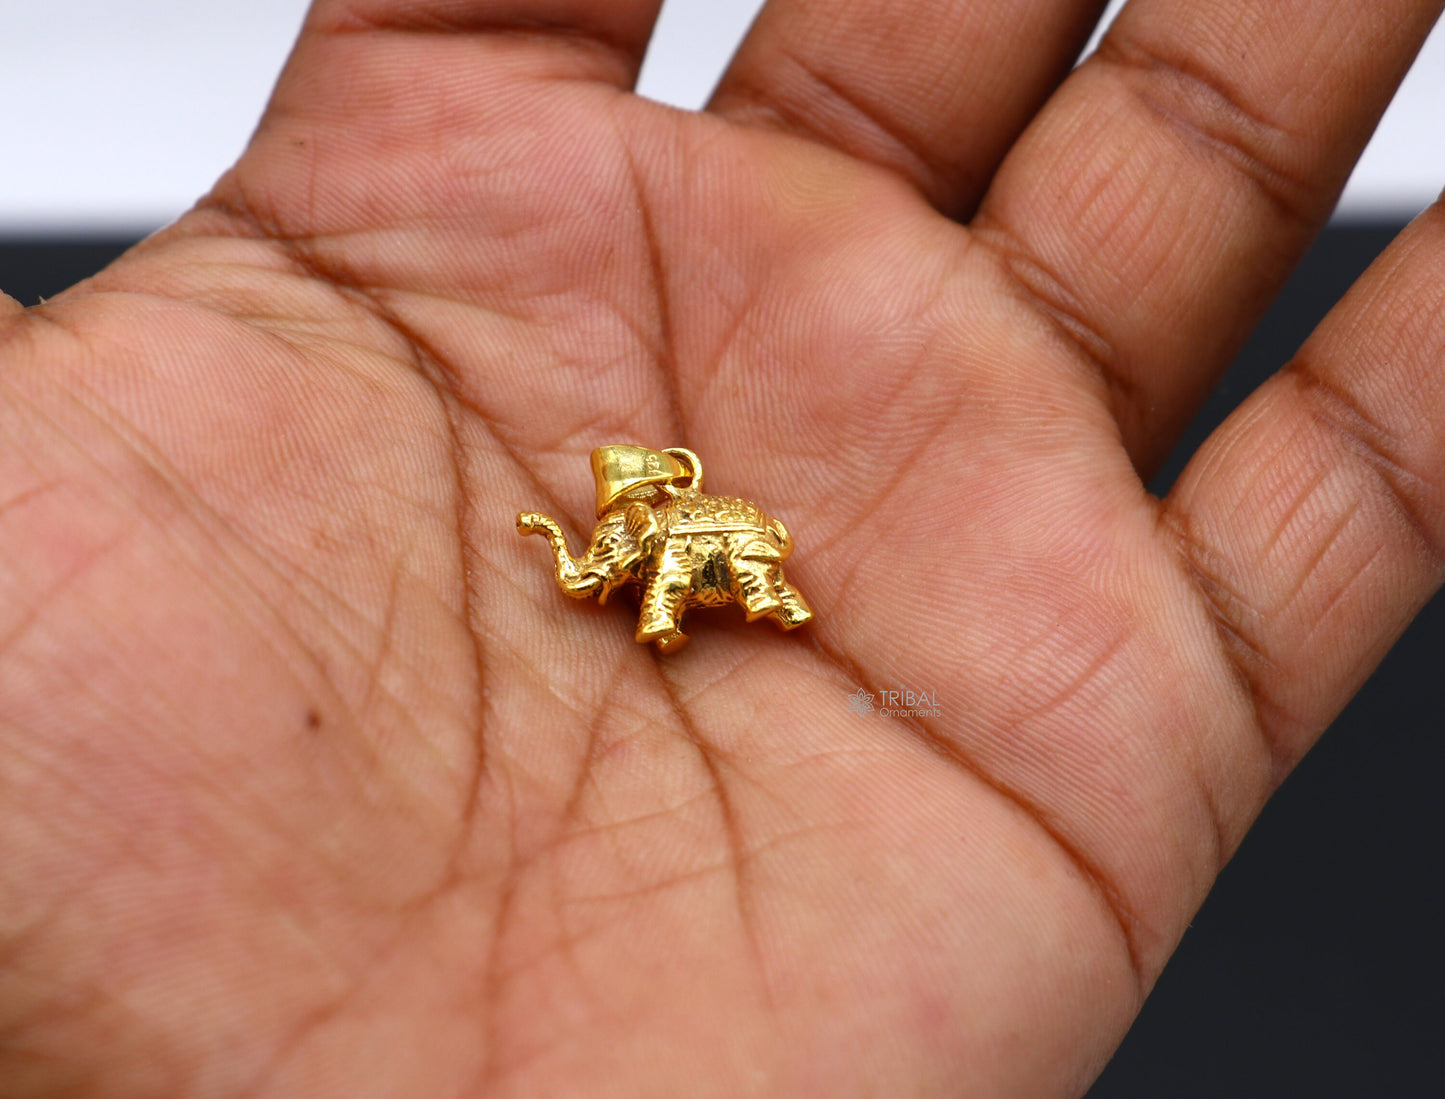 925 sterling silver handmade solid design small elephant pendant amazing exclusive divine lucky gold polished pendant jewelry nsp610 - TRIBAL ORNAMENTS